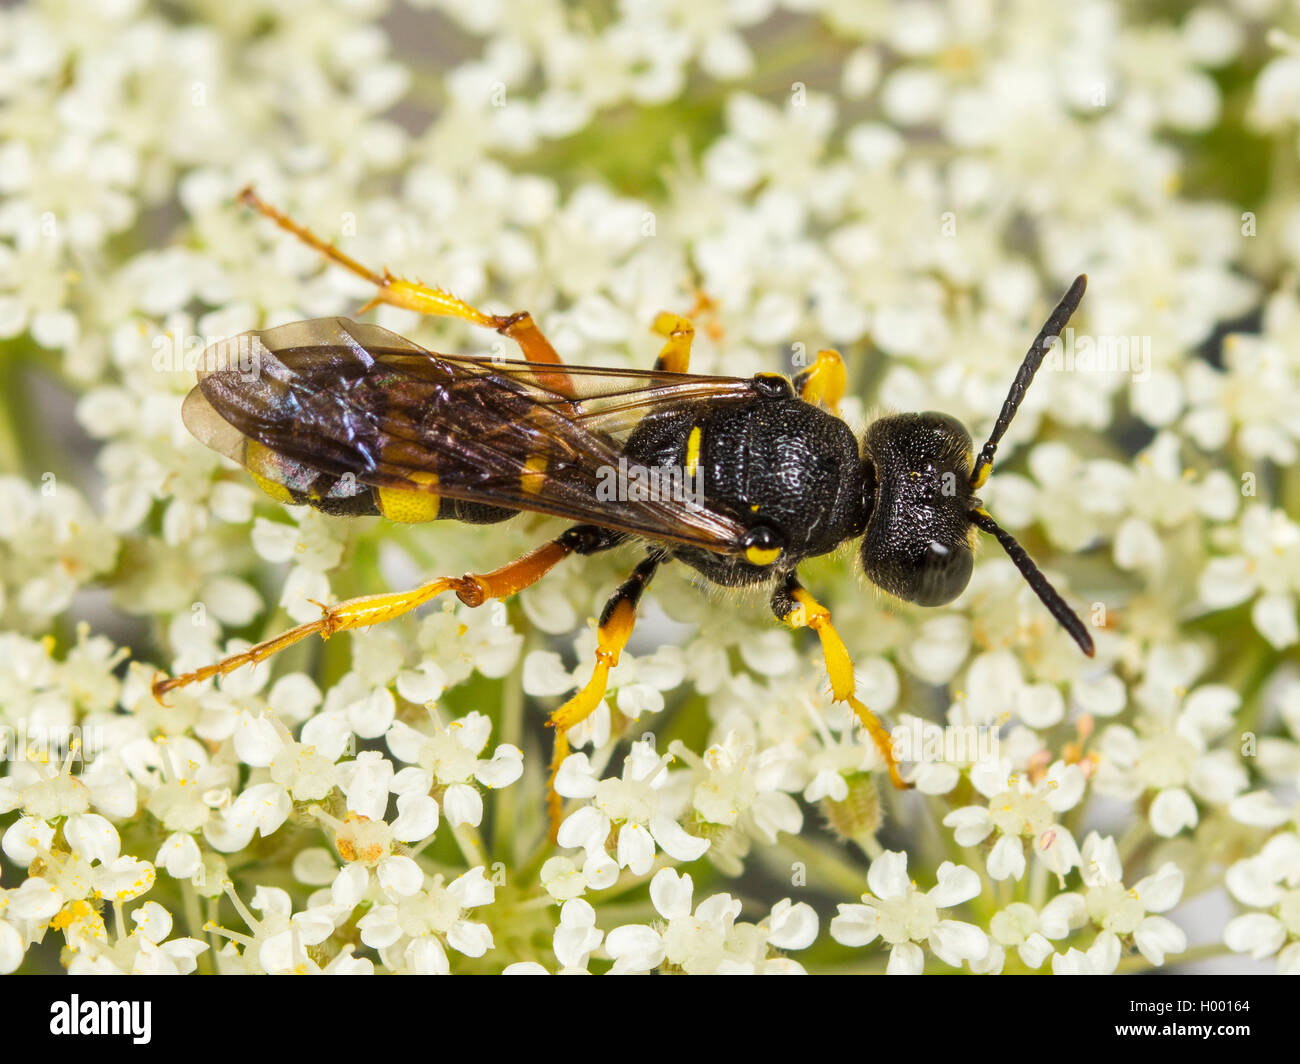 Ornate Tailed Digger Wasp (Cerceris rybyensis), Female foraging on Wild Carrot (Daucus carota), Germany Stock Photo